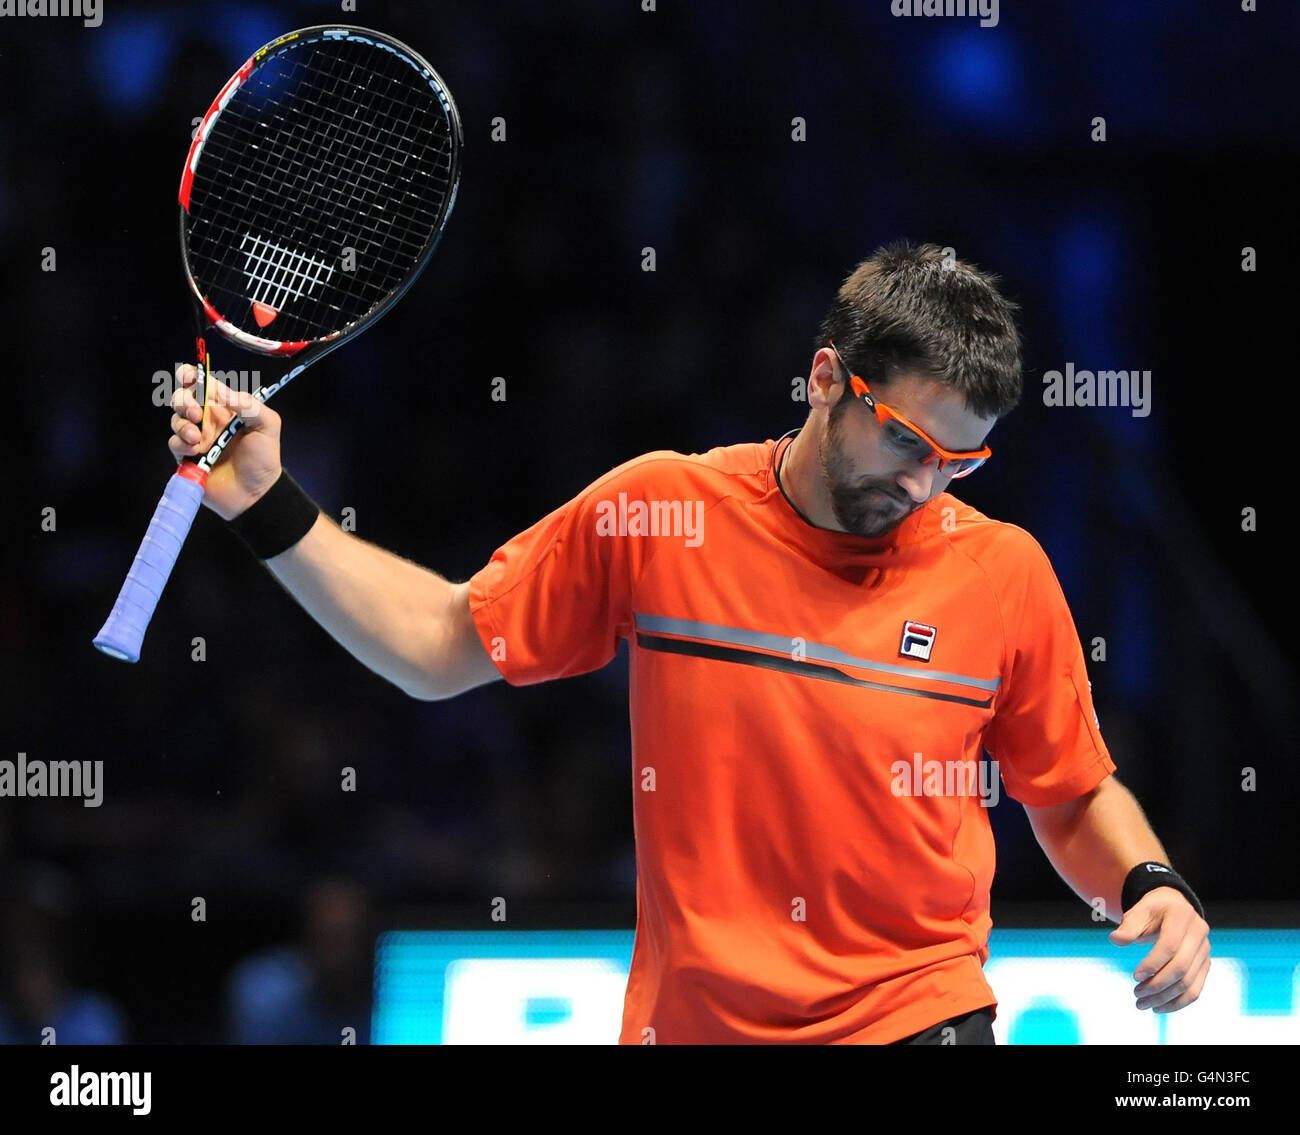 Serbia's Janko Tipsarevic reacts on his way to defeat by the Czech Republic's Tomas Berdych during the Barclays ATP World Tour Finals at the O2 Arena, London. Stock Photo